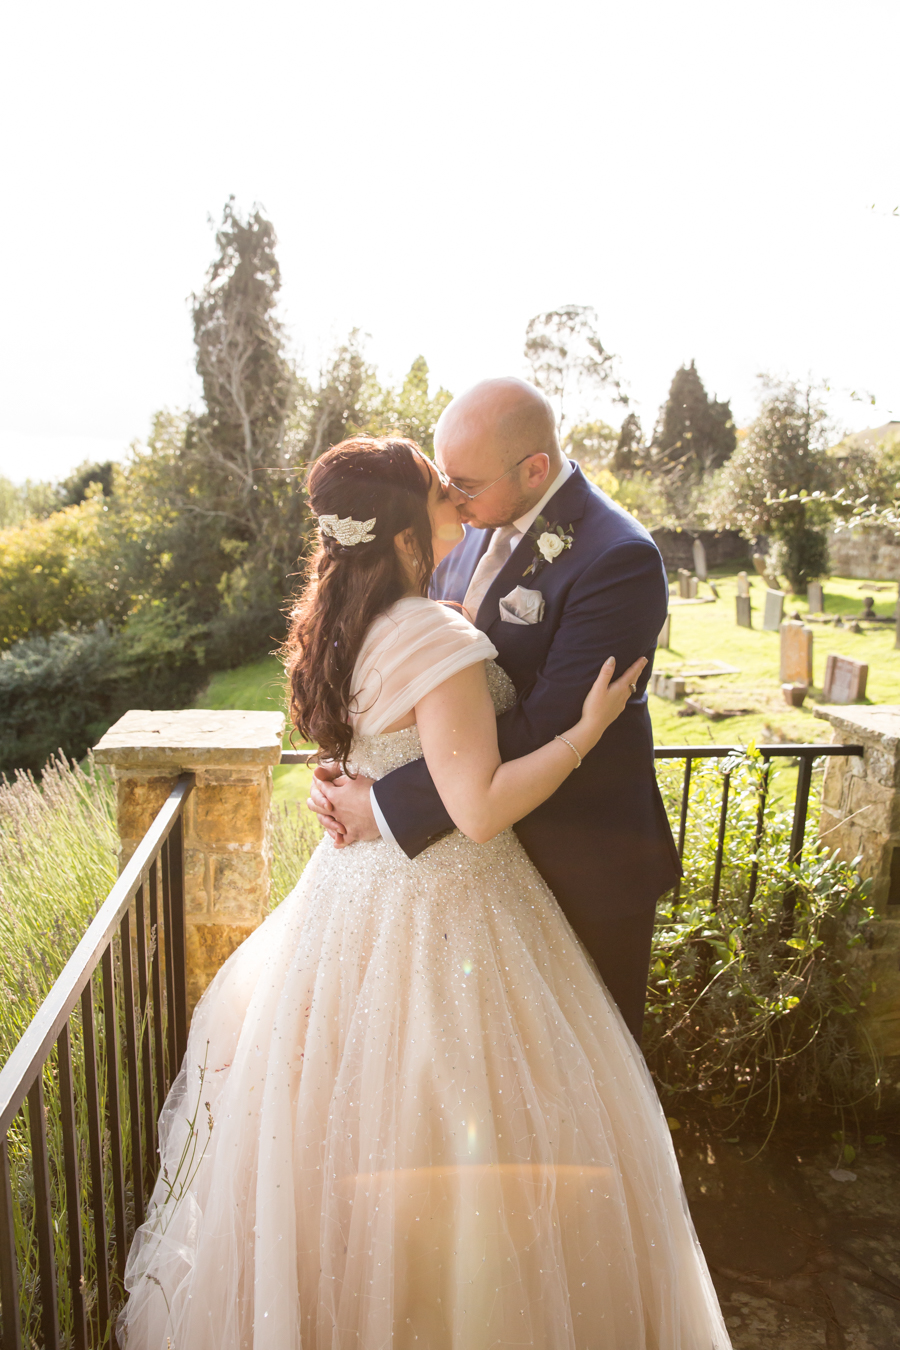 Sparkles and starlight for Gilly & Den’s beautiful Sussex wedding, with Hannah Larkin Photography